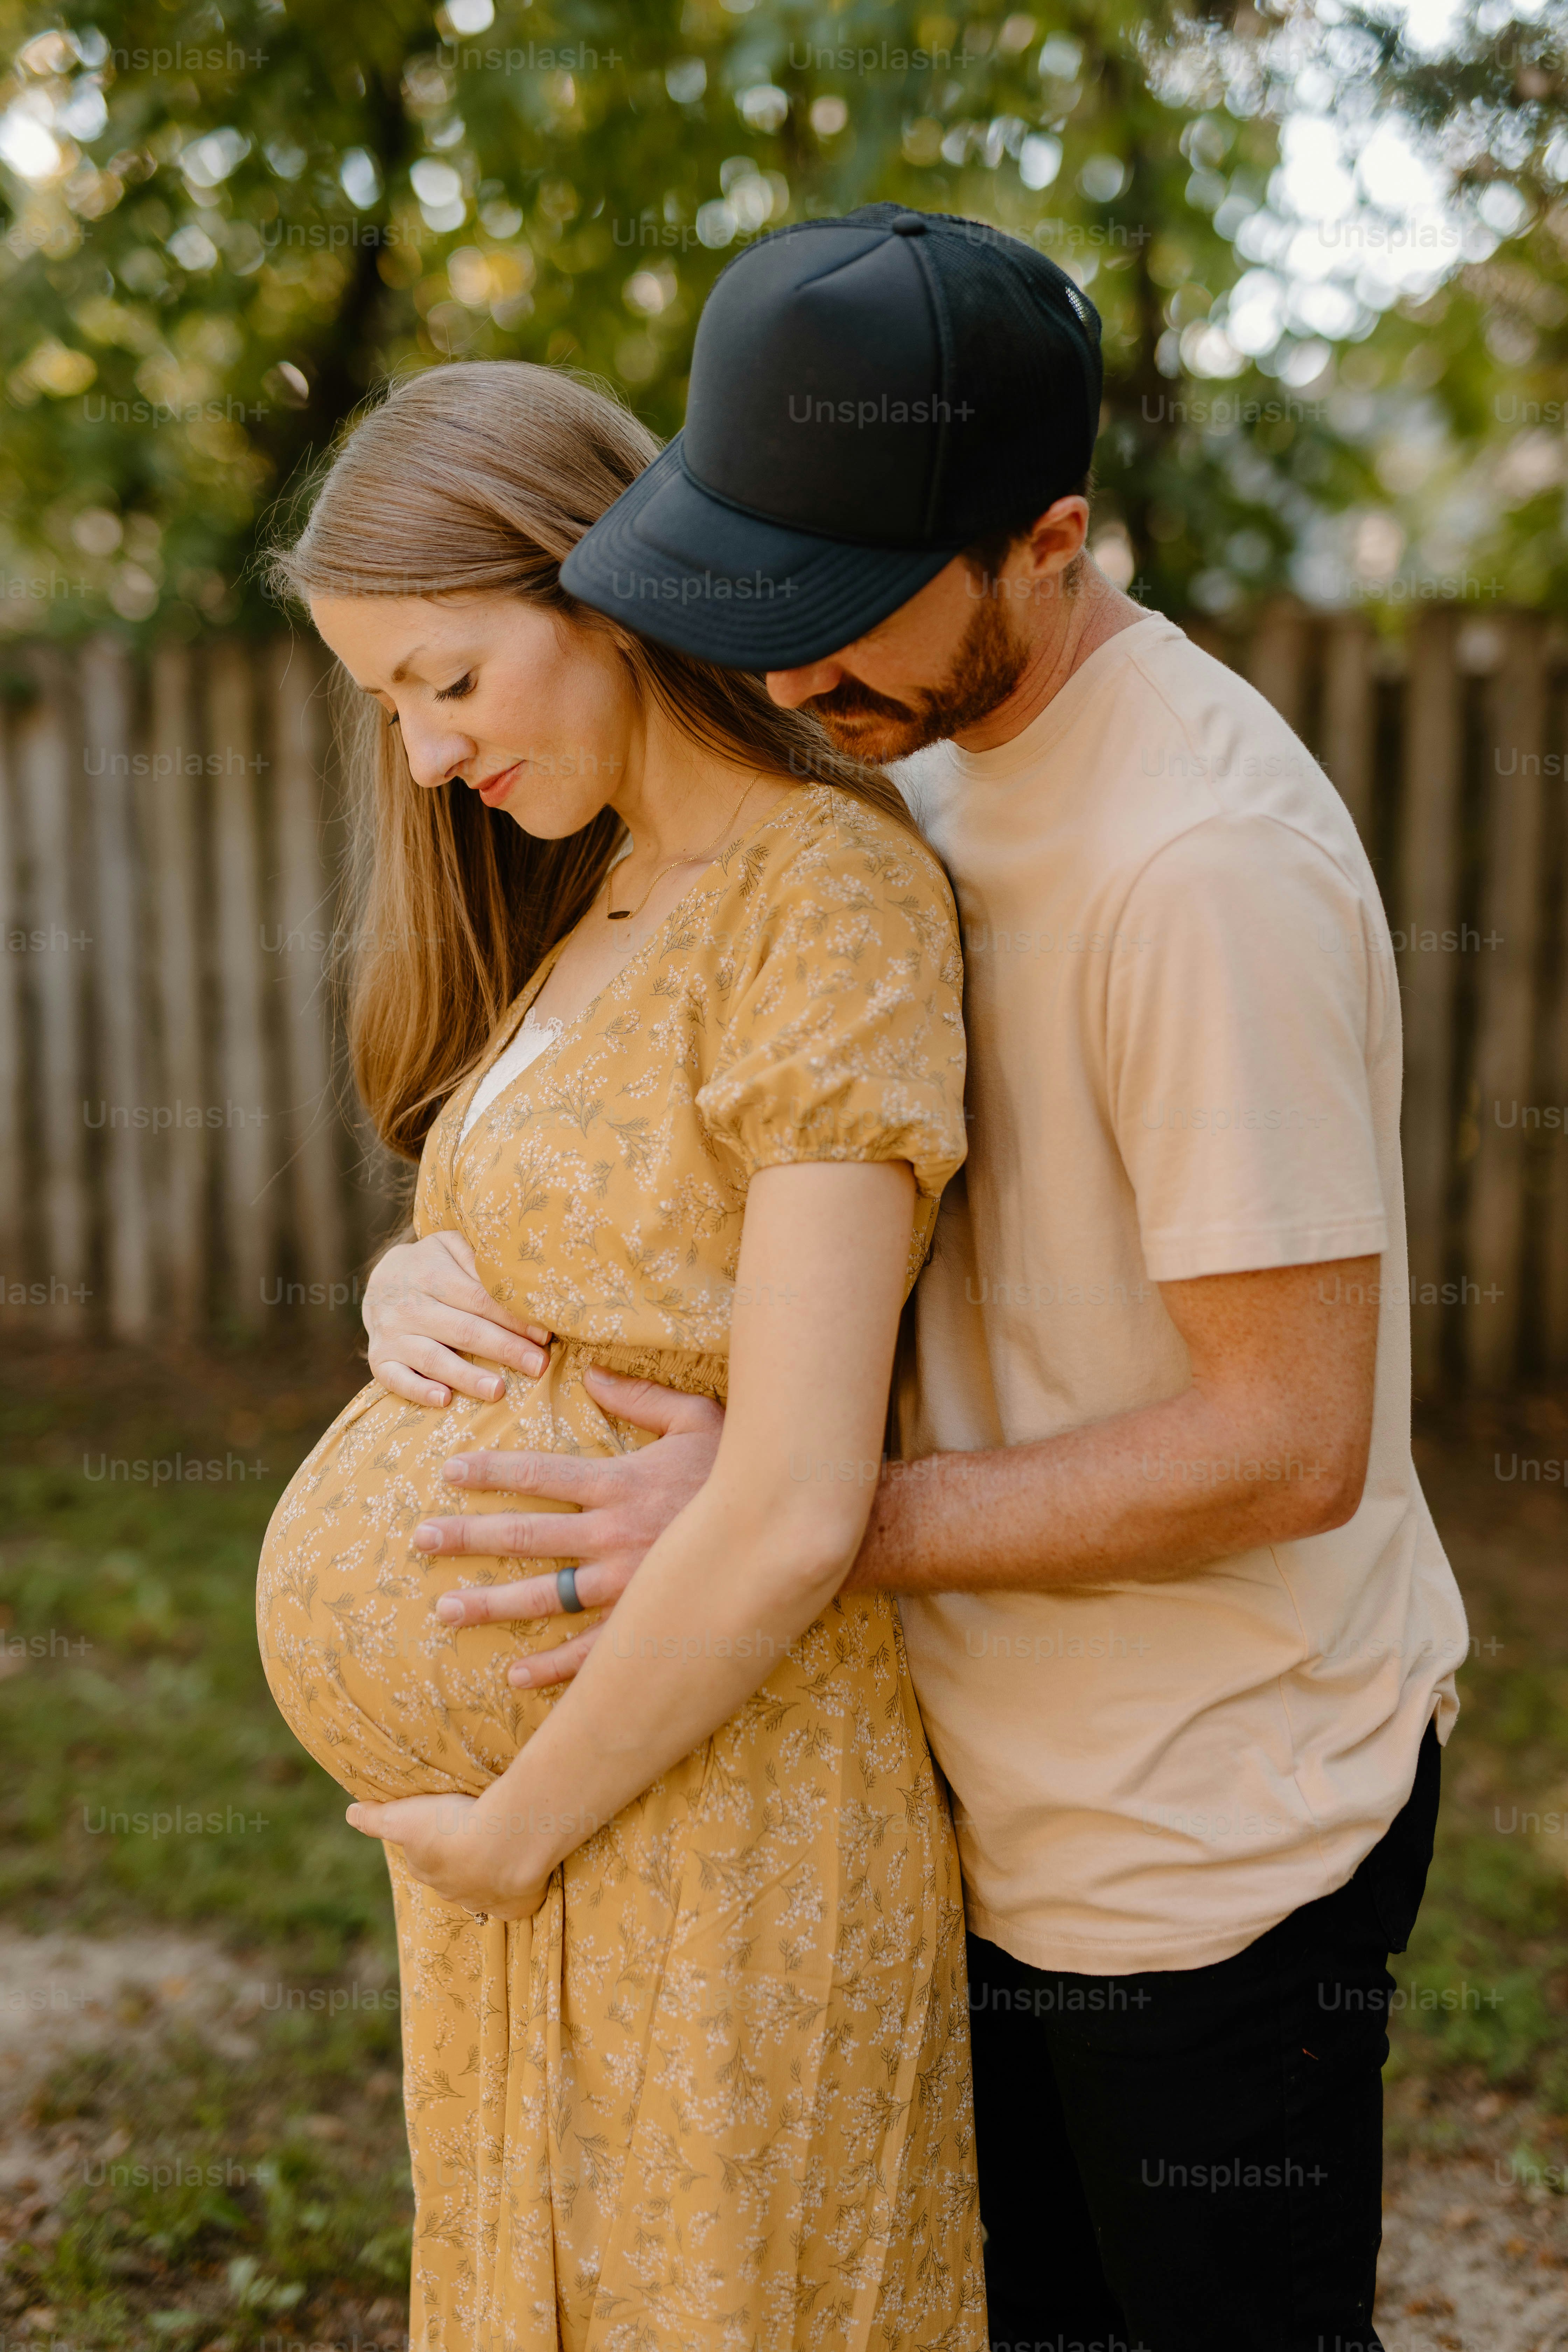 500+ Pregnant Woman Pictures Download Free Images on Unsplash pic